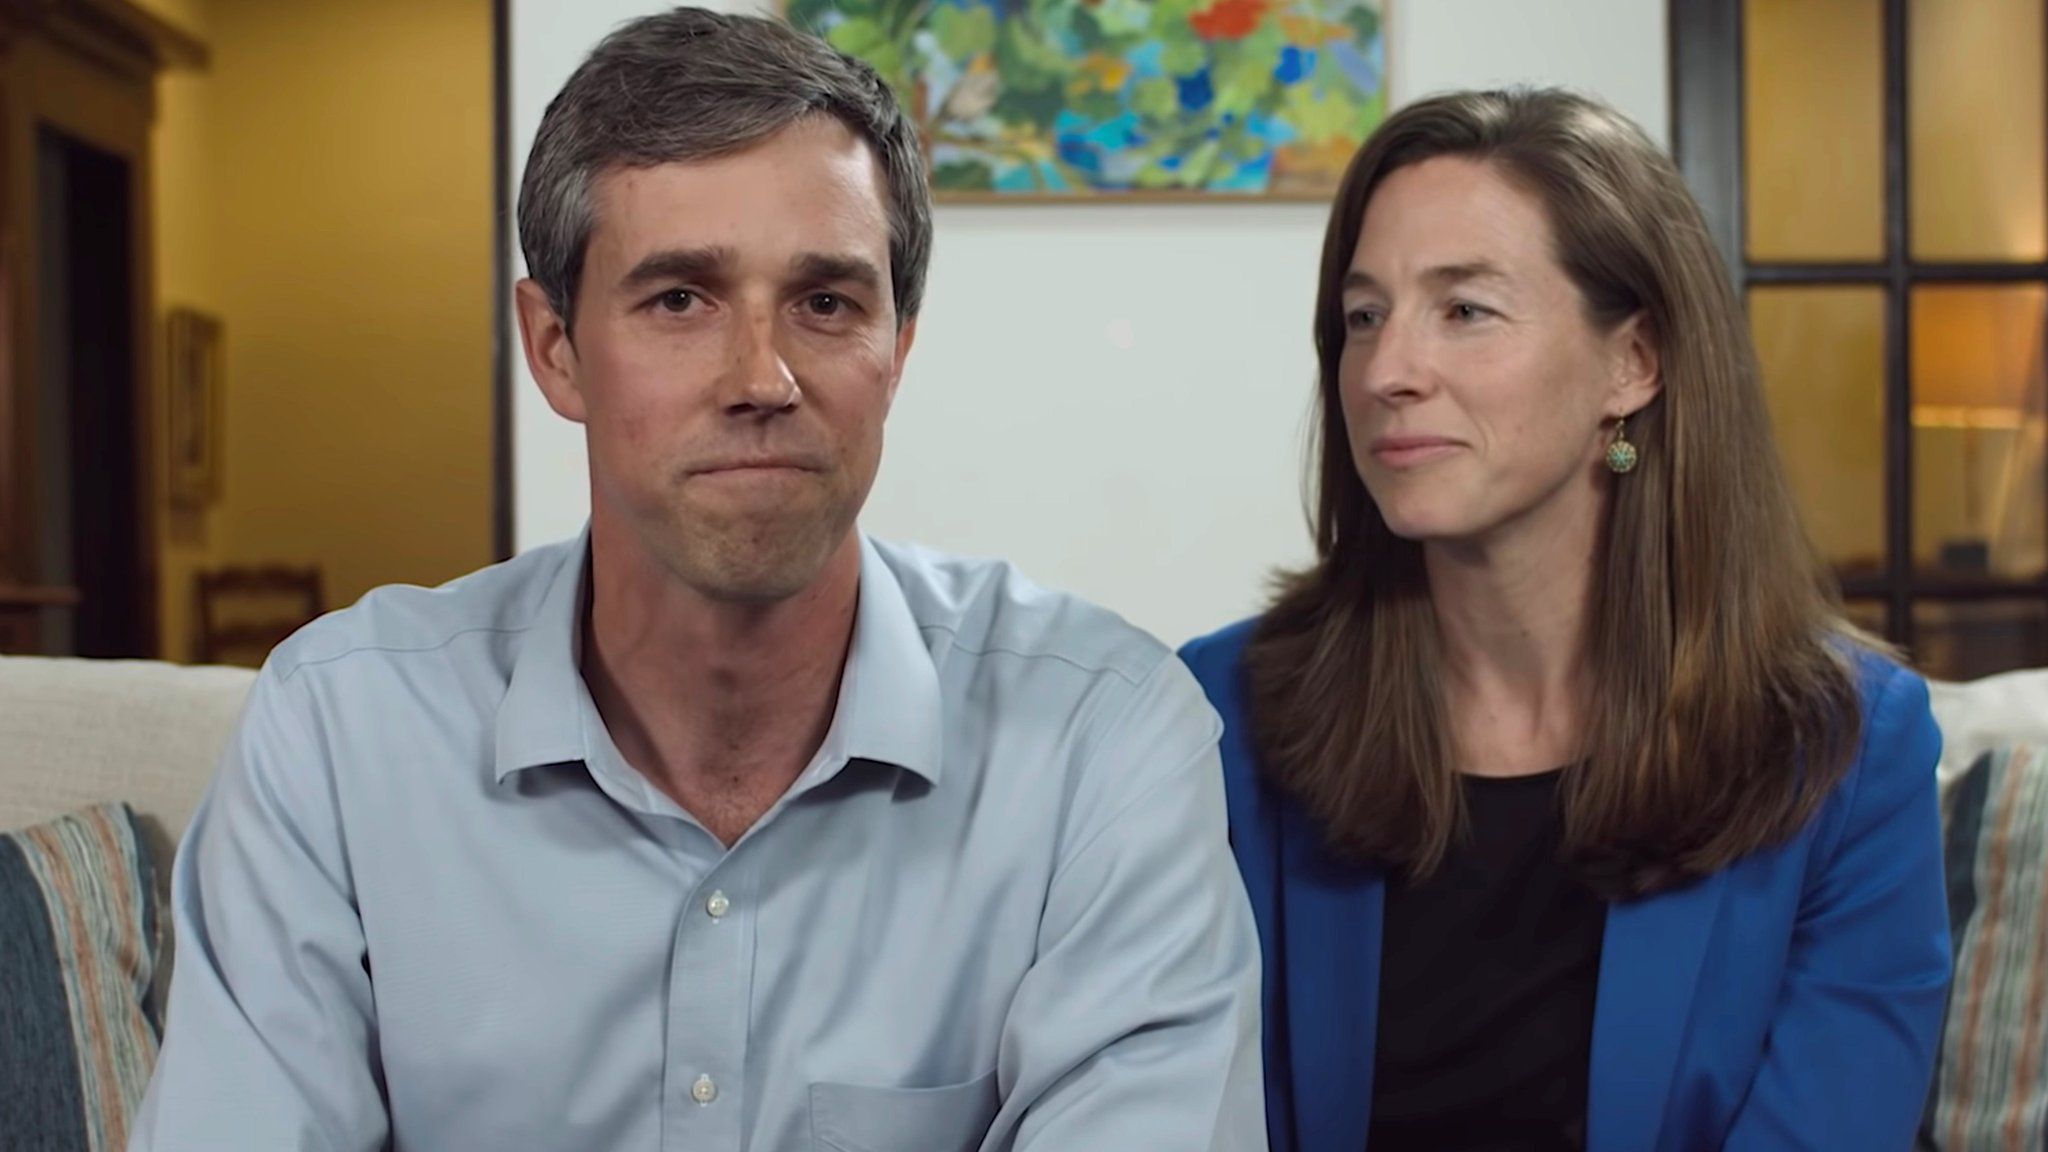 Beto O'Rourke and his wife Amy Hoover Sanders in the campaign launch video